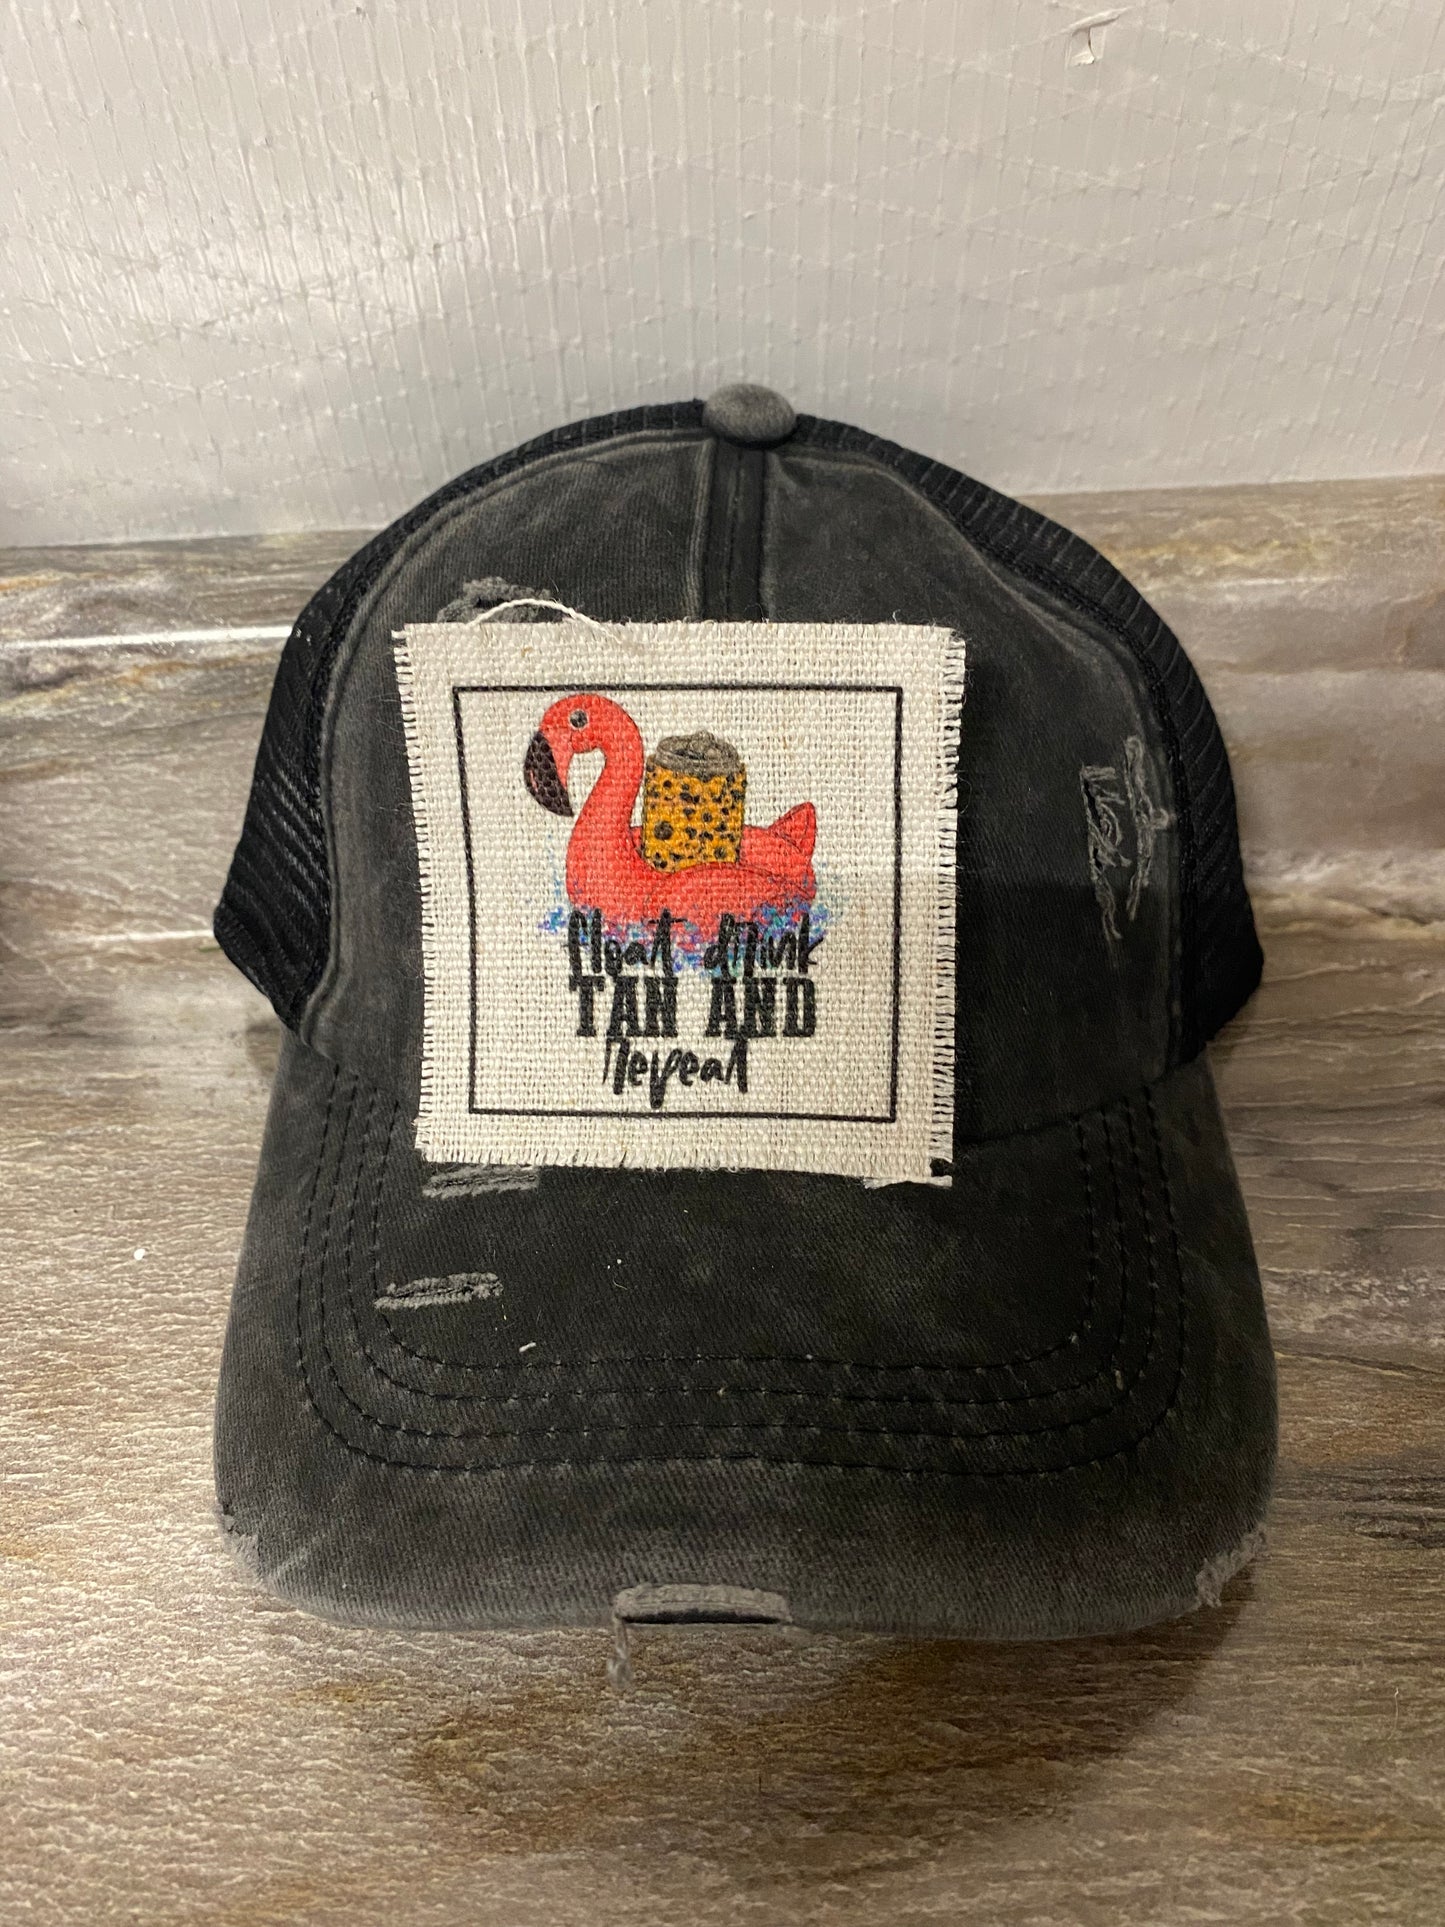 Float Drink Tan and Repeat Hat Patch